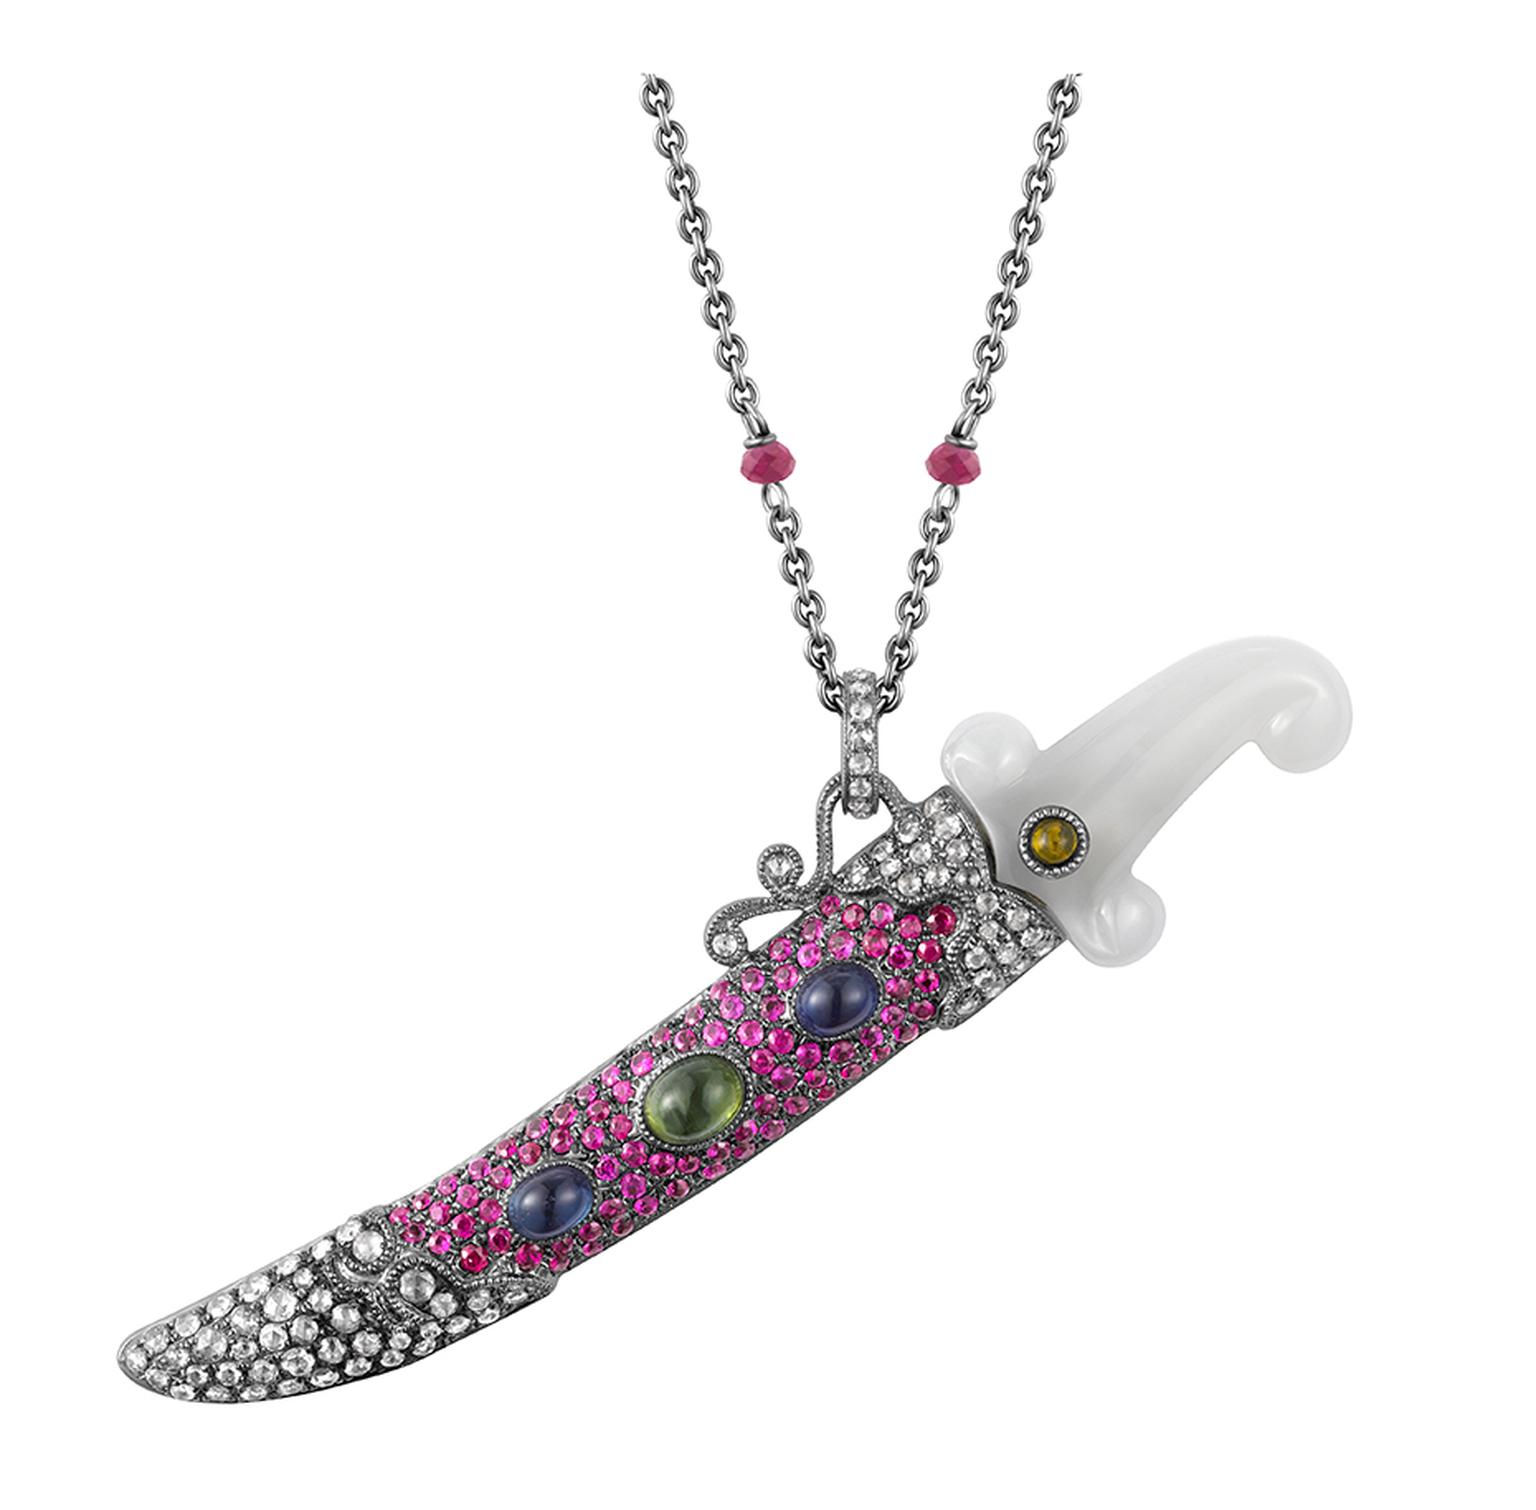 Dickson Yewn Imperial Sword & Amulet collection pendants, set with jade, rubies, sapphires and other precious stones.